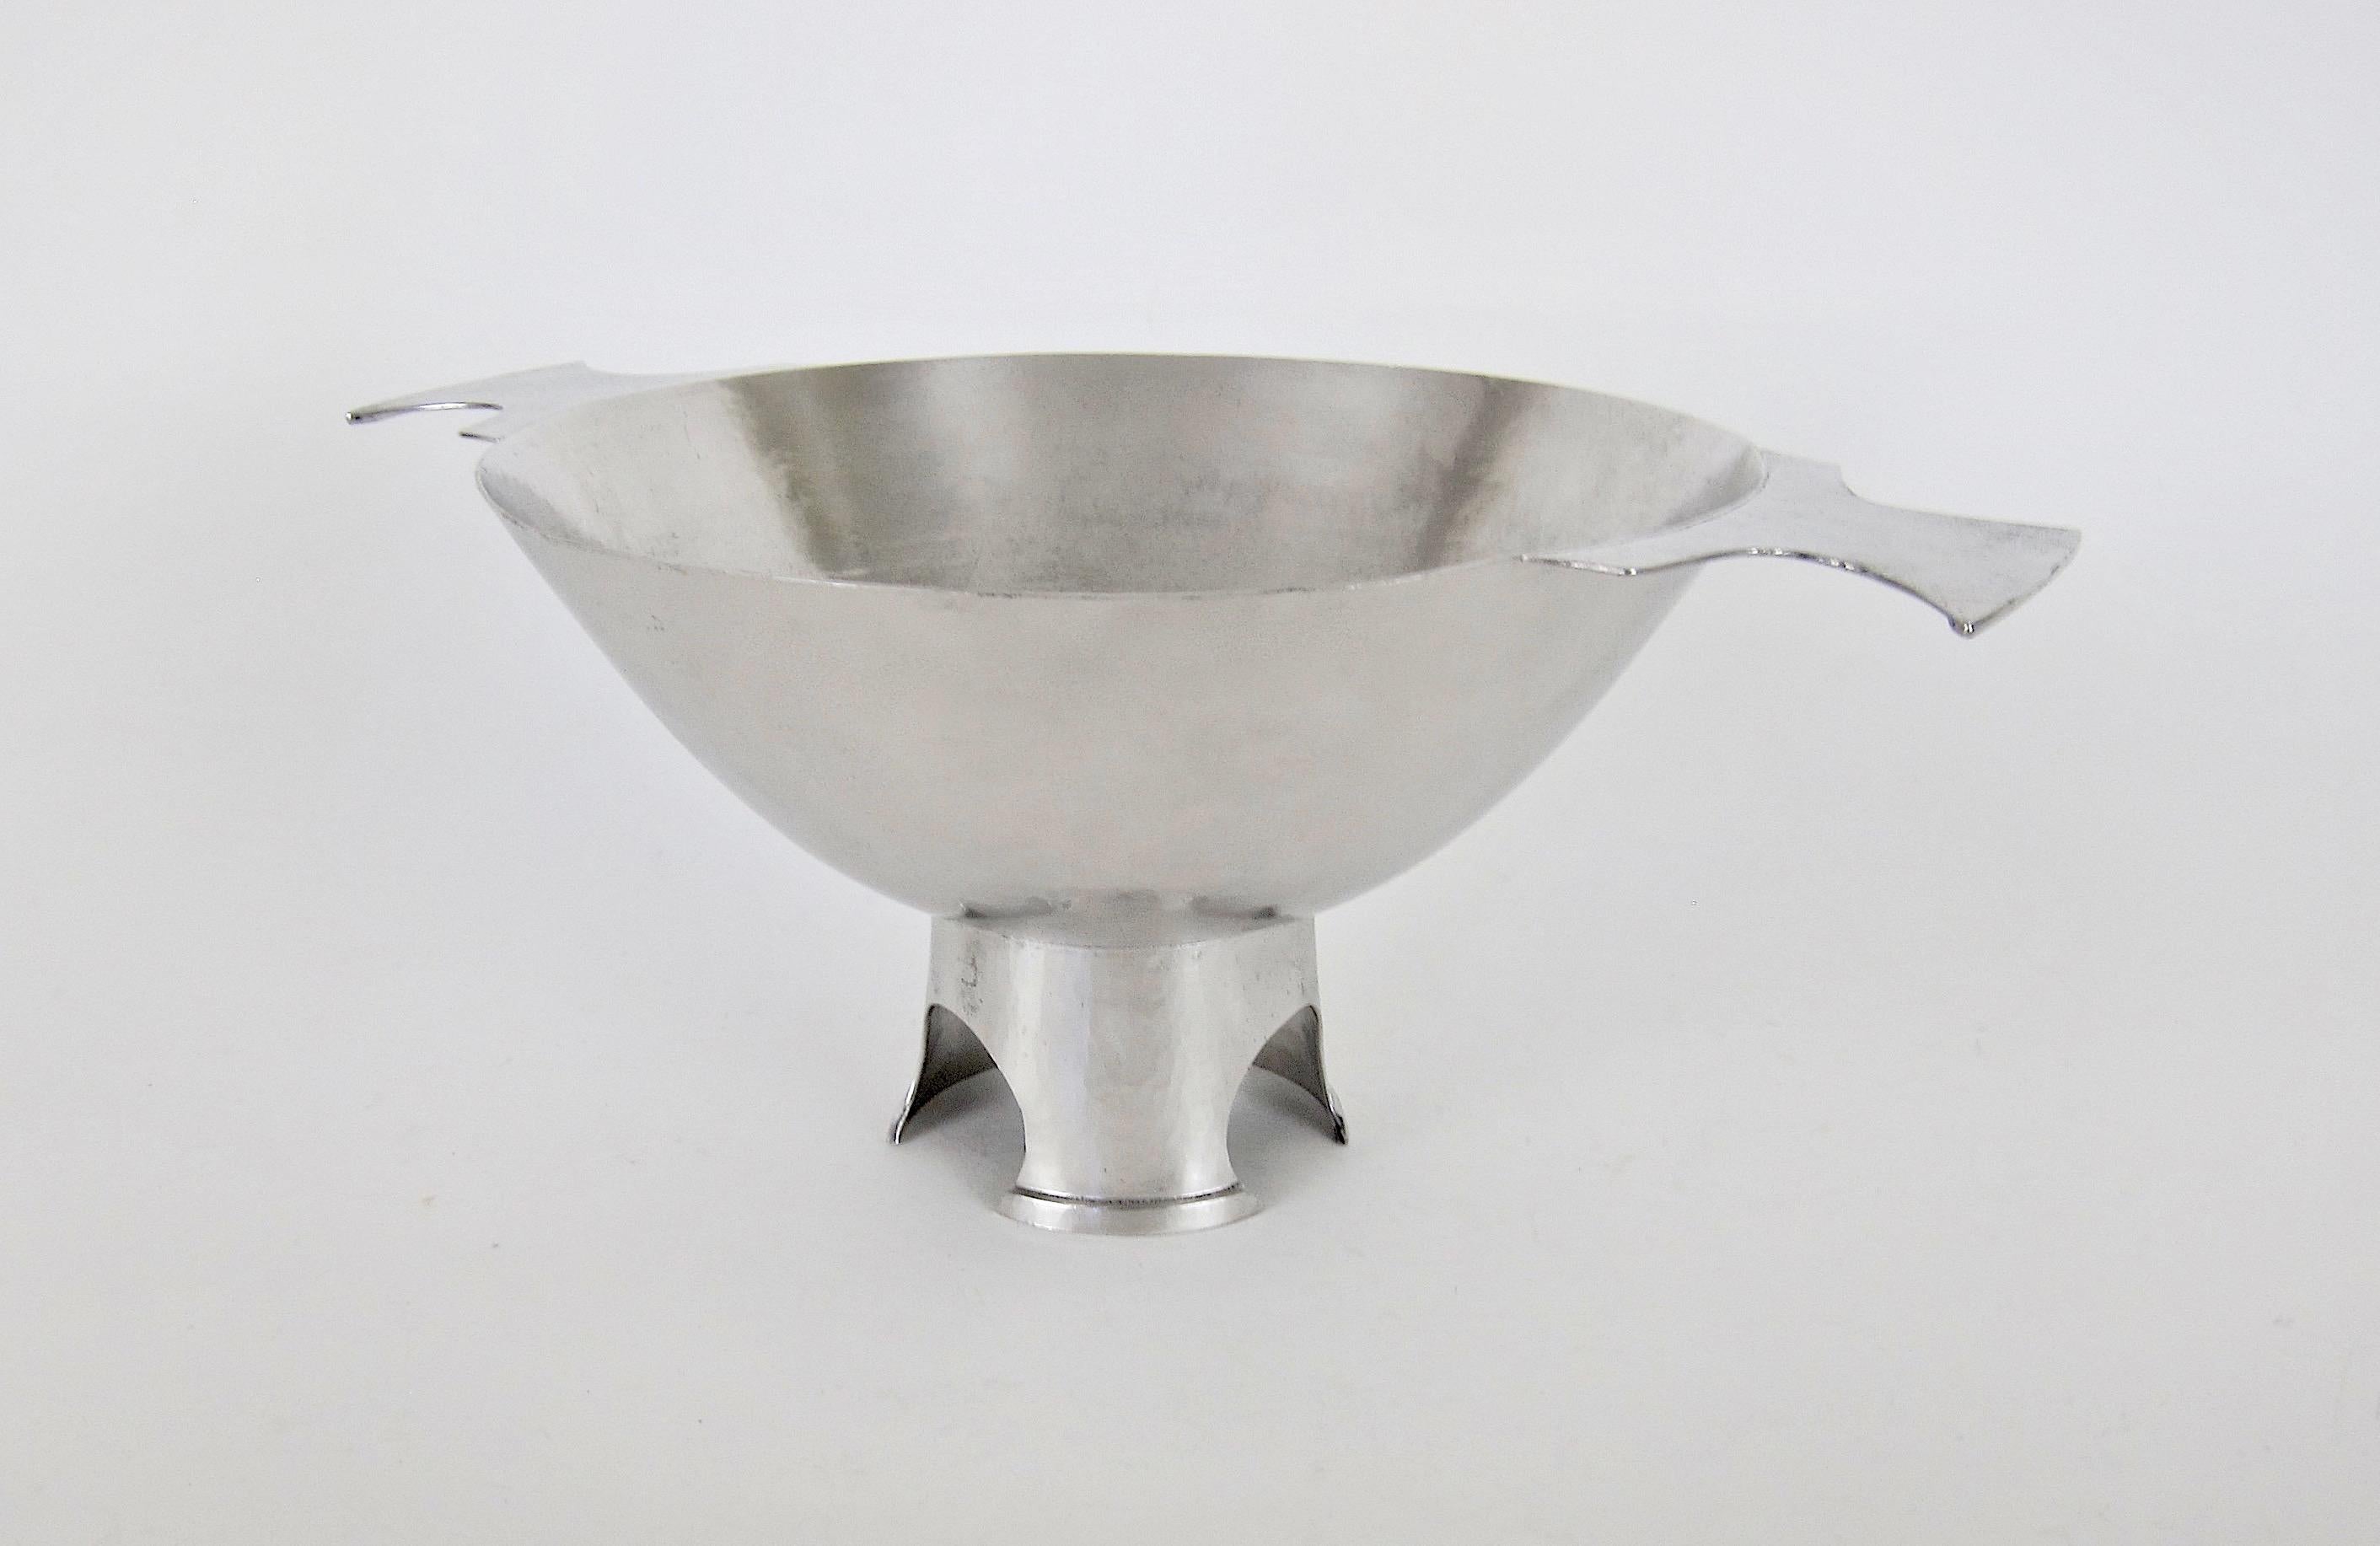 A large double-handled centerpiece bowl in hammered silver metal by American metalsmith, designer and jeweler, Marie Zimmermann (1879-1972) dating to the early 1920s. Zimmermann designed the sculptural footed bowl in the shape of a large-scale